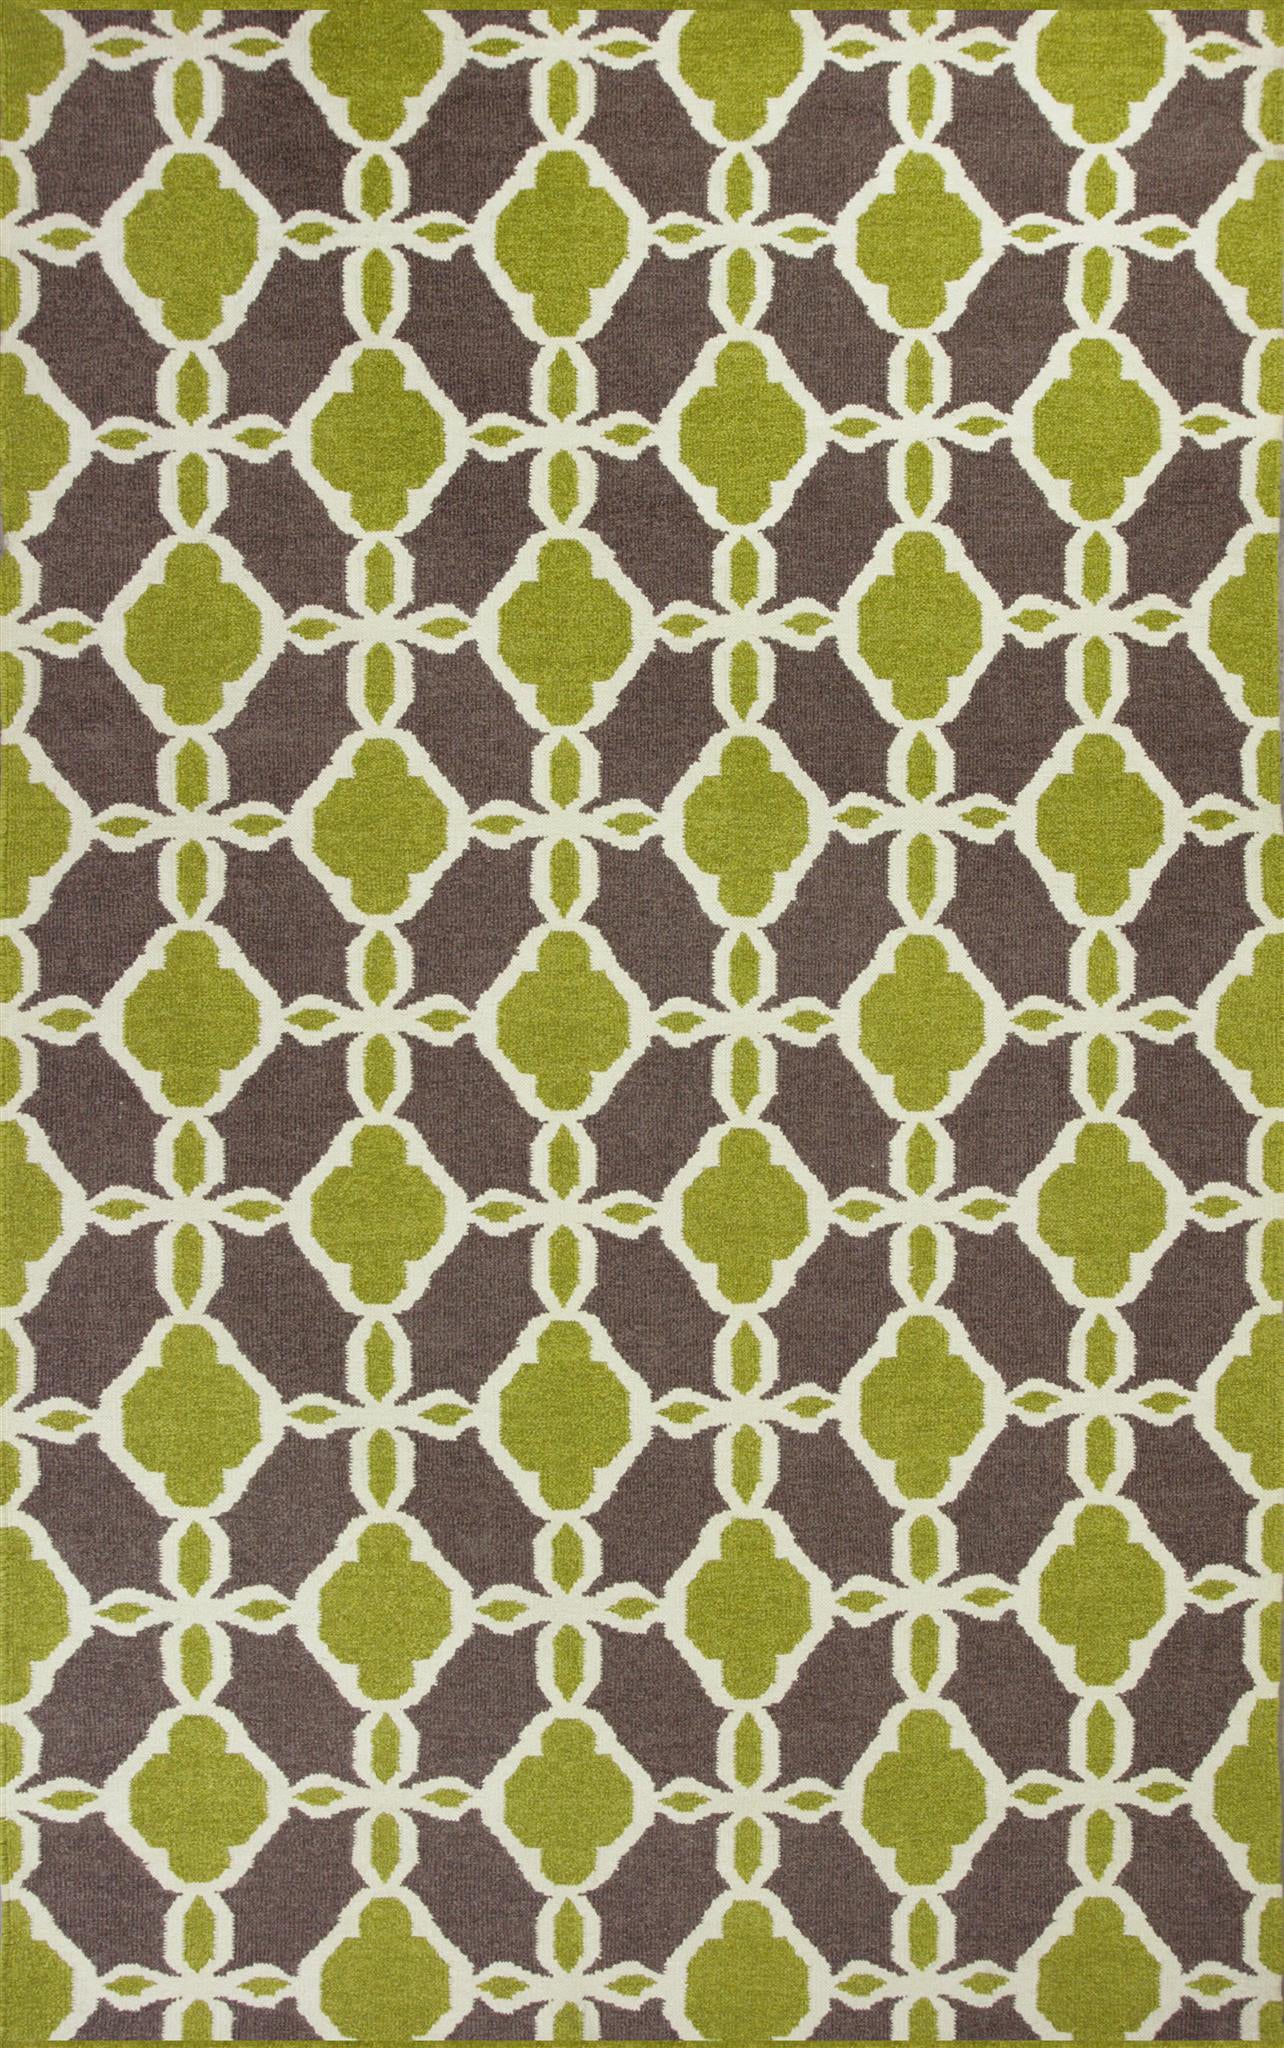 KAS Solstice 4007 Citron/Taupe Serenity Area Rug main image